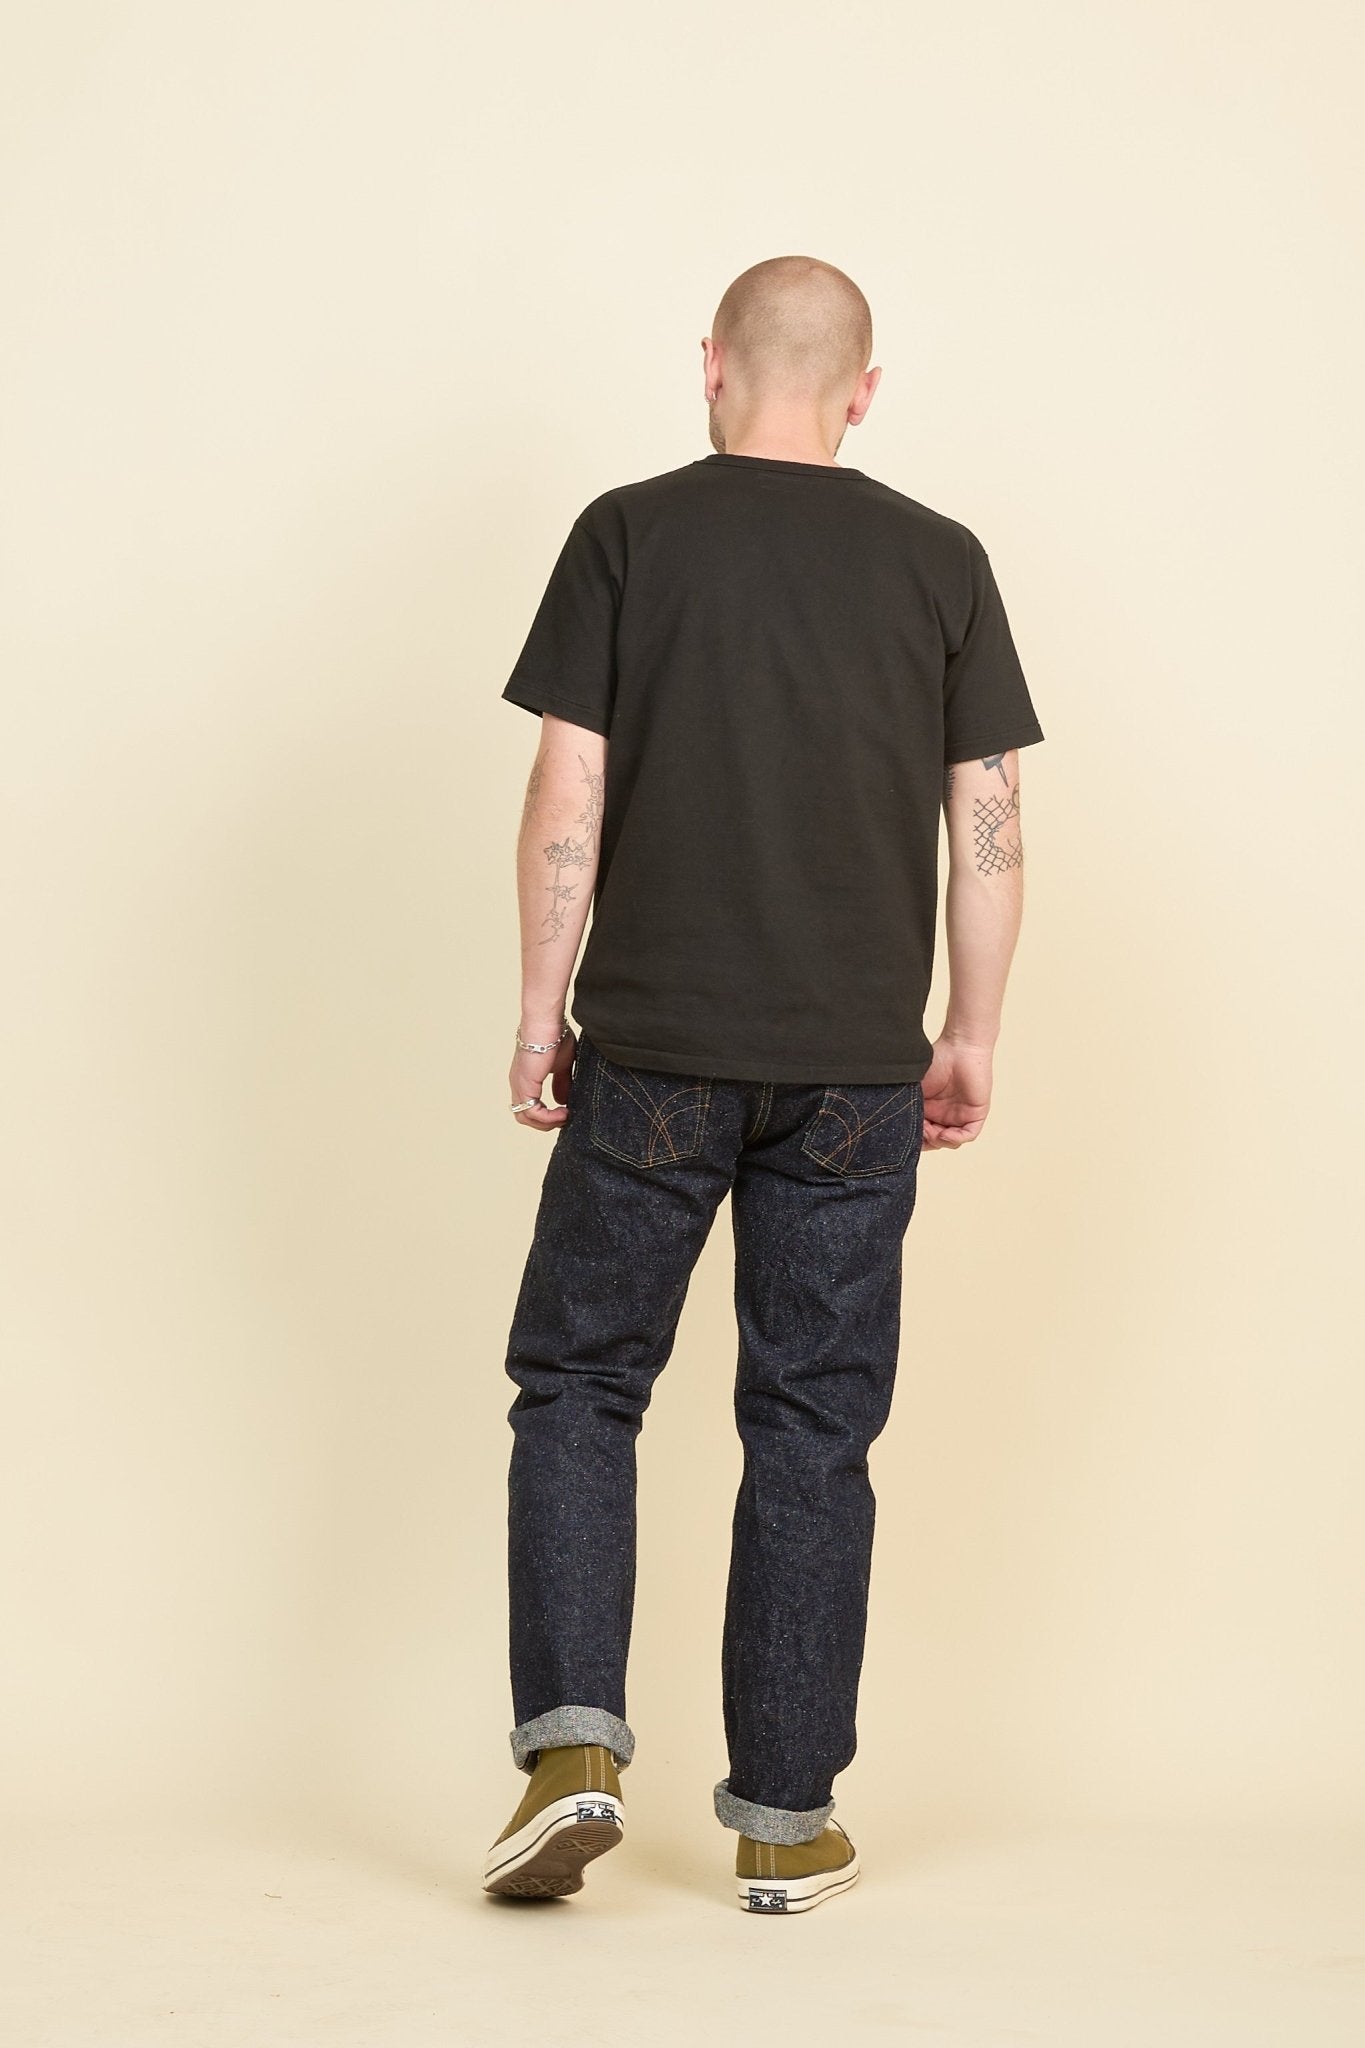 The Strike Gold "Keep Earth" Organic / Recycled Cotton Tapered Selvedge Jeans -The Strike Gold - URAHARA